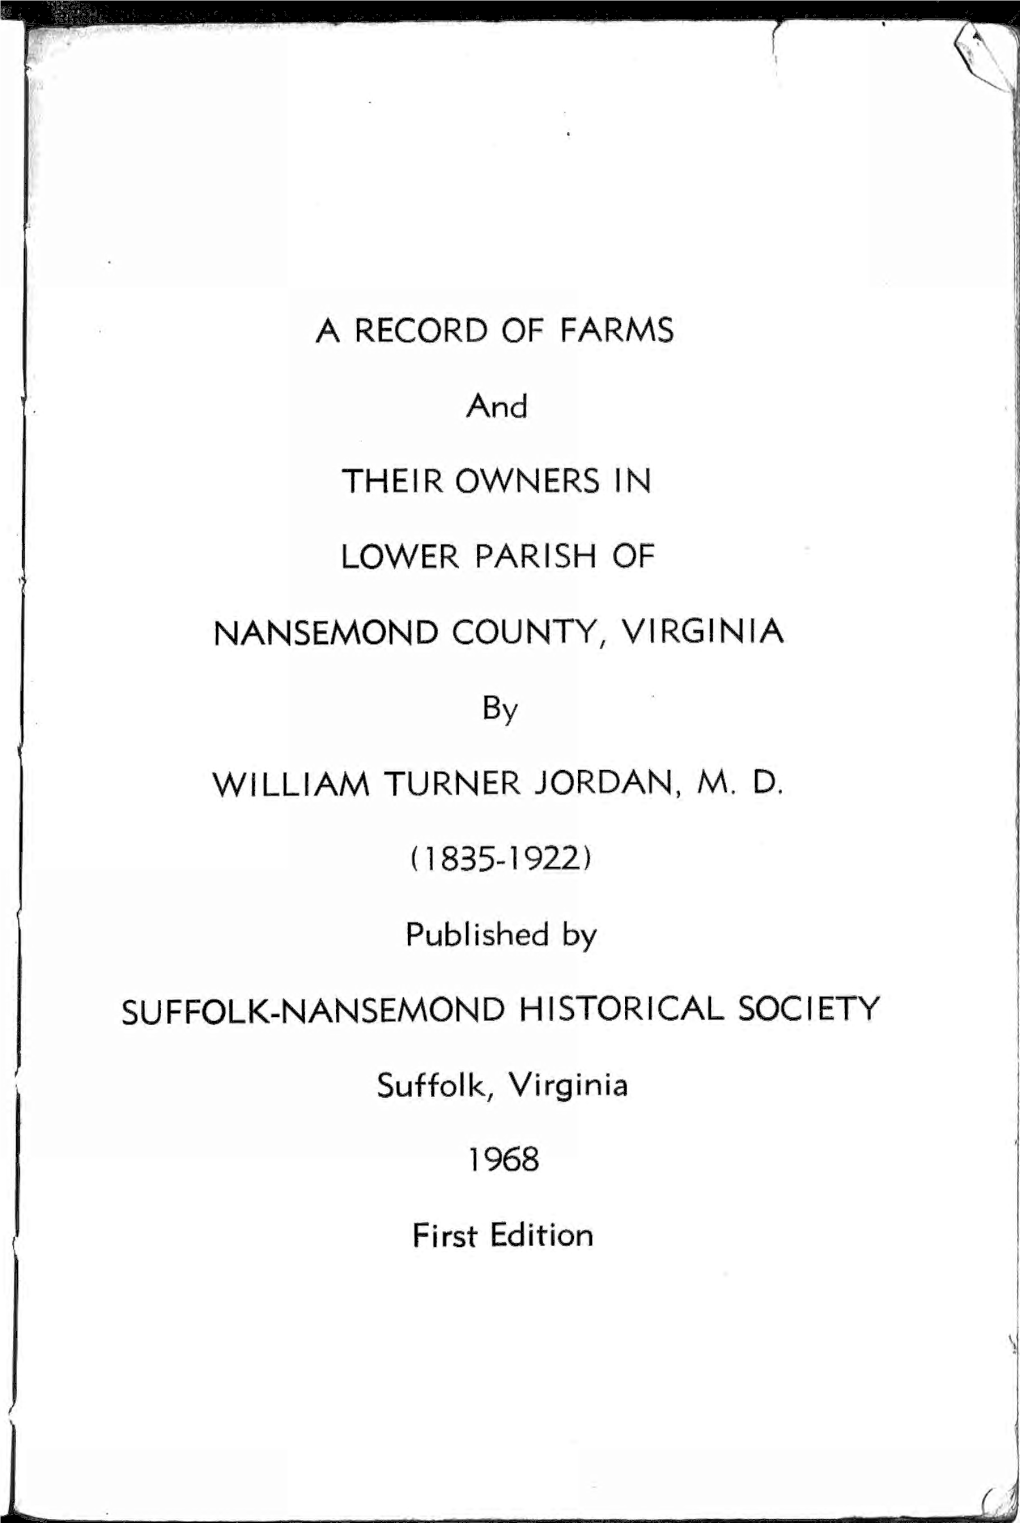 A Record of Farms and Their Owners in Lower Parish of Nansemond County